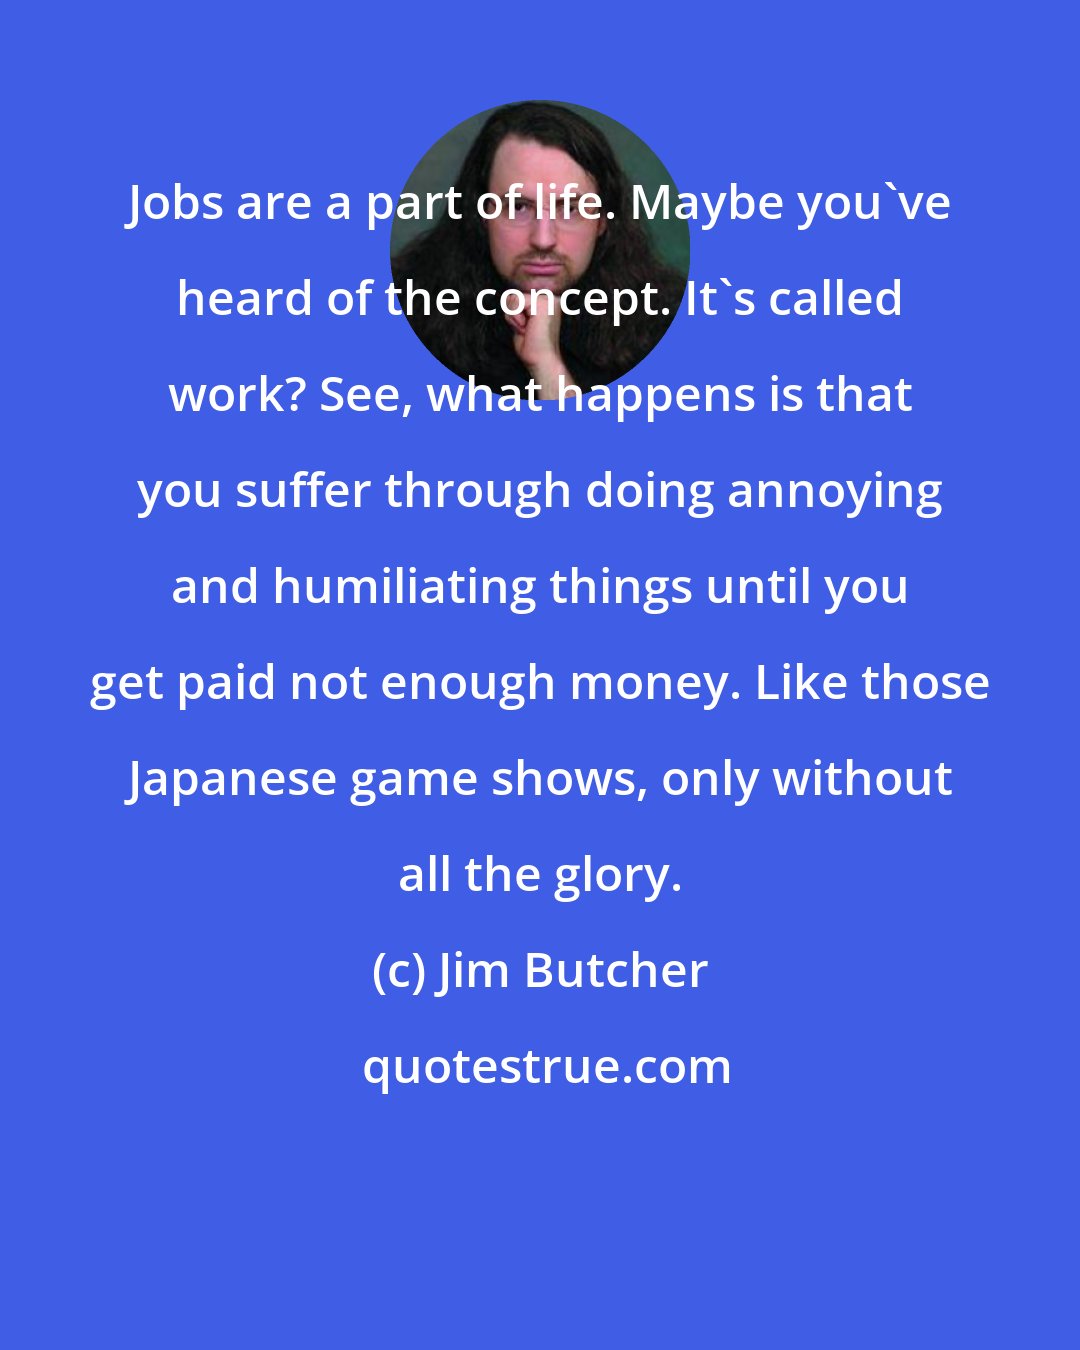 Jim Butcher: Jobs are a part of life. Maybe you've heard of the concept. It's called work? See, what happens is that you suffer through doing annoying and humiliating things until you get paid not enough money. Like those Japanese game shows, only without all the glory.